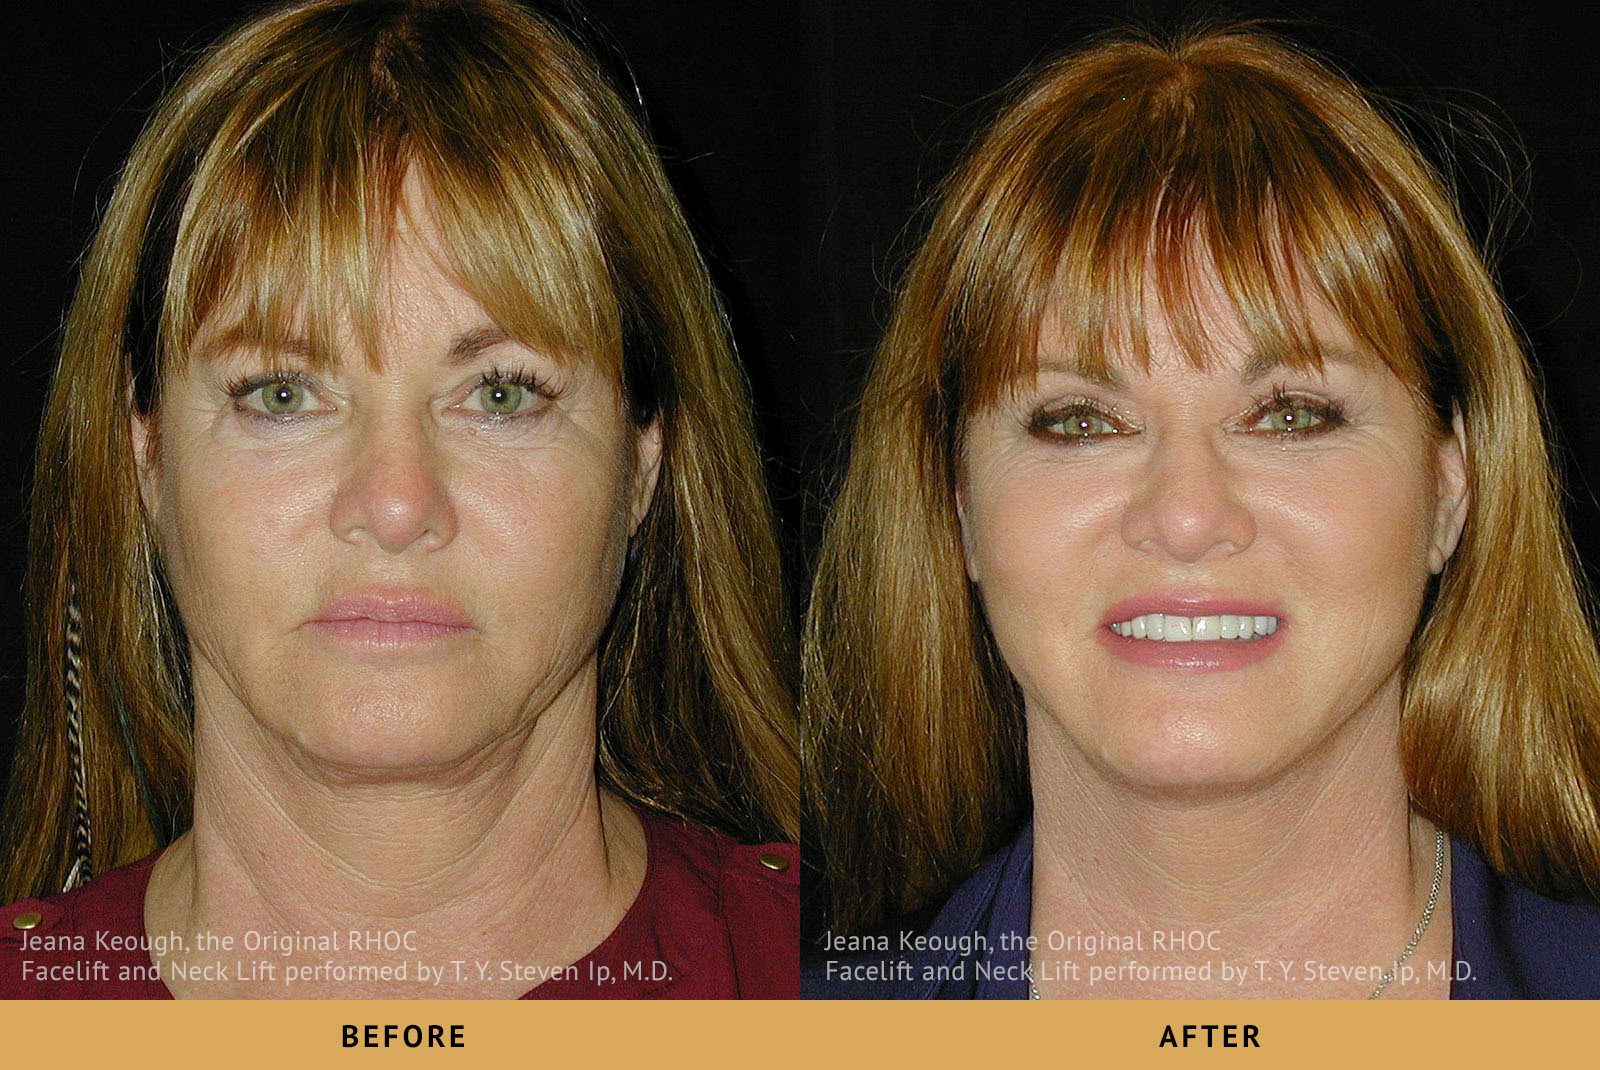 jeana keough real housewives of orange county RHOC Facelift and Necklift